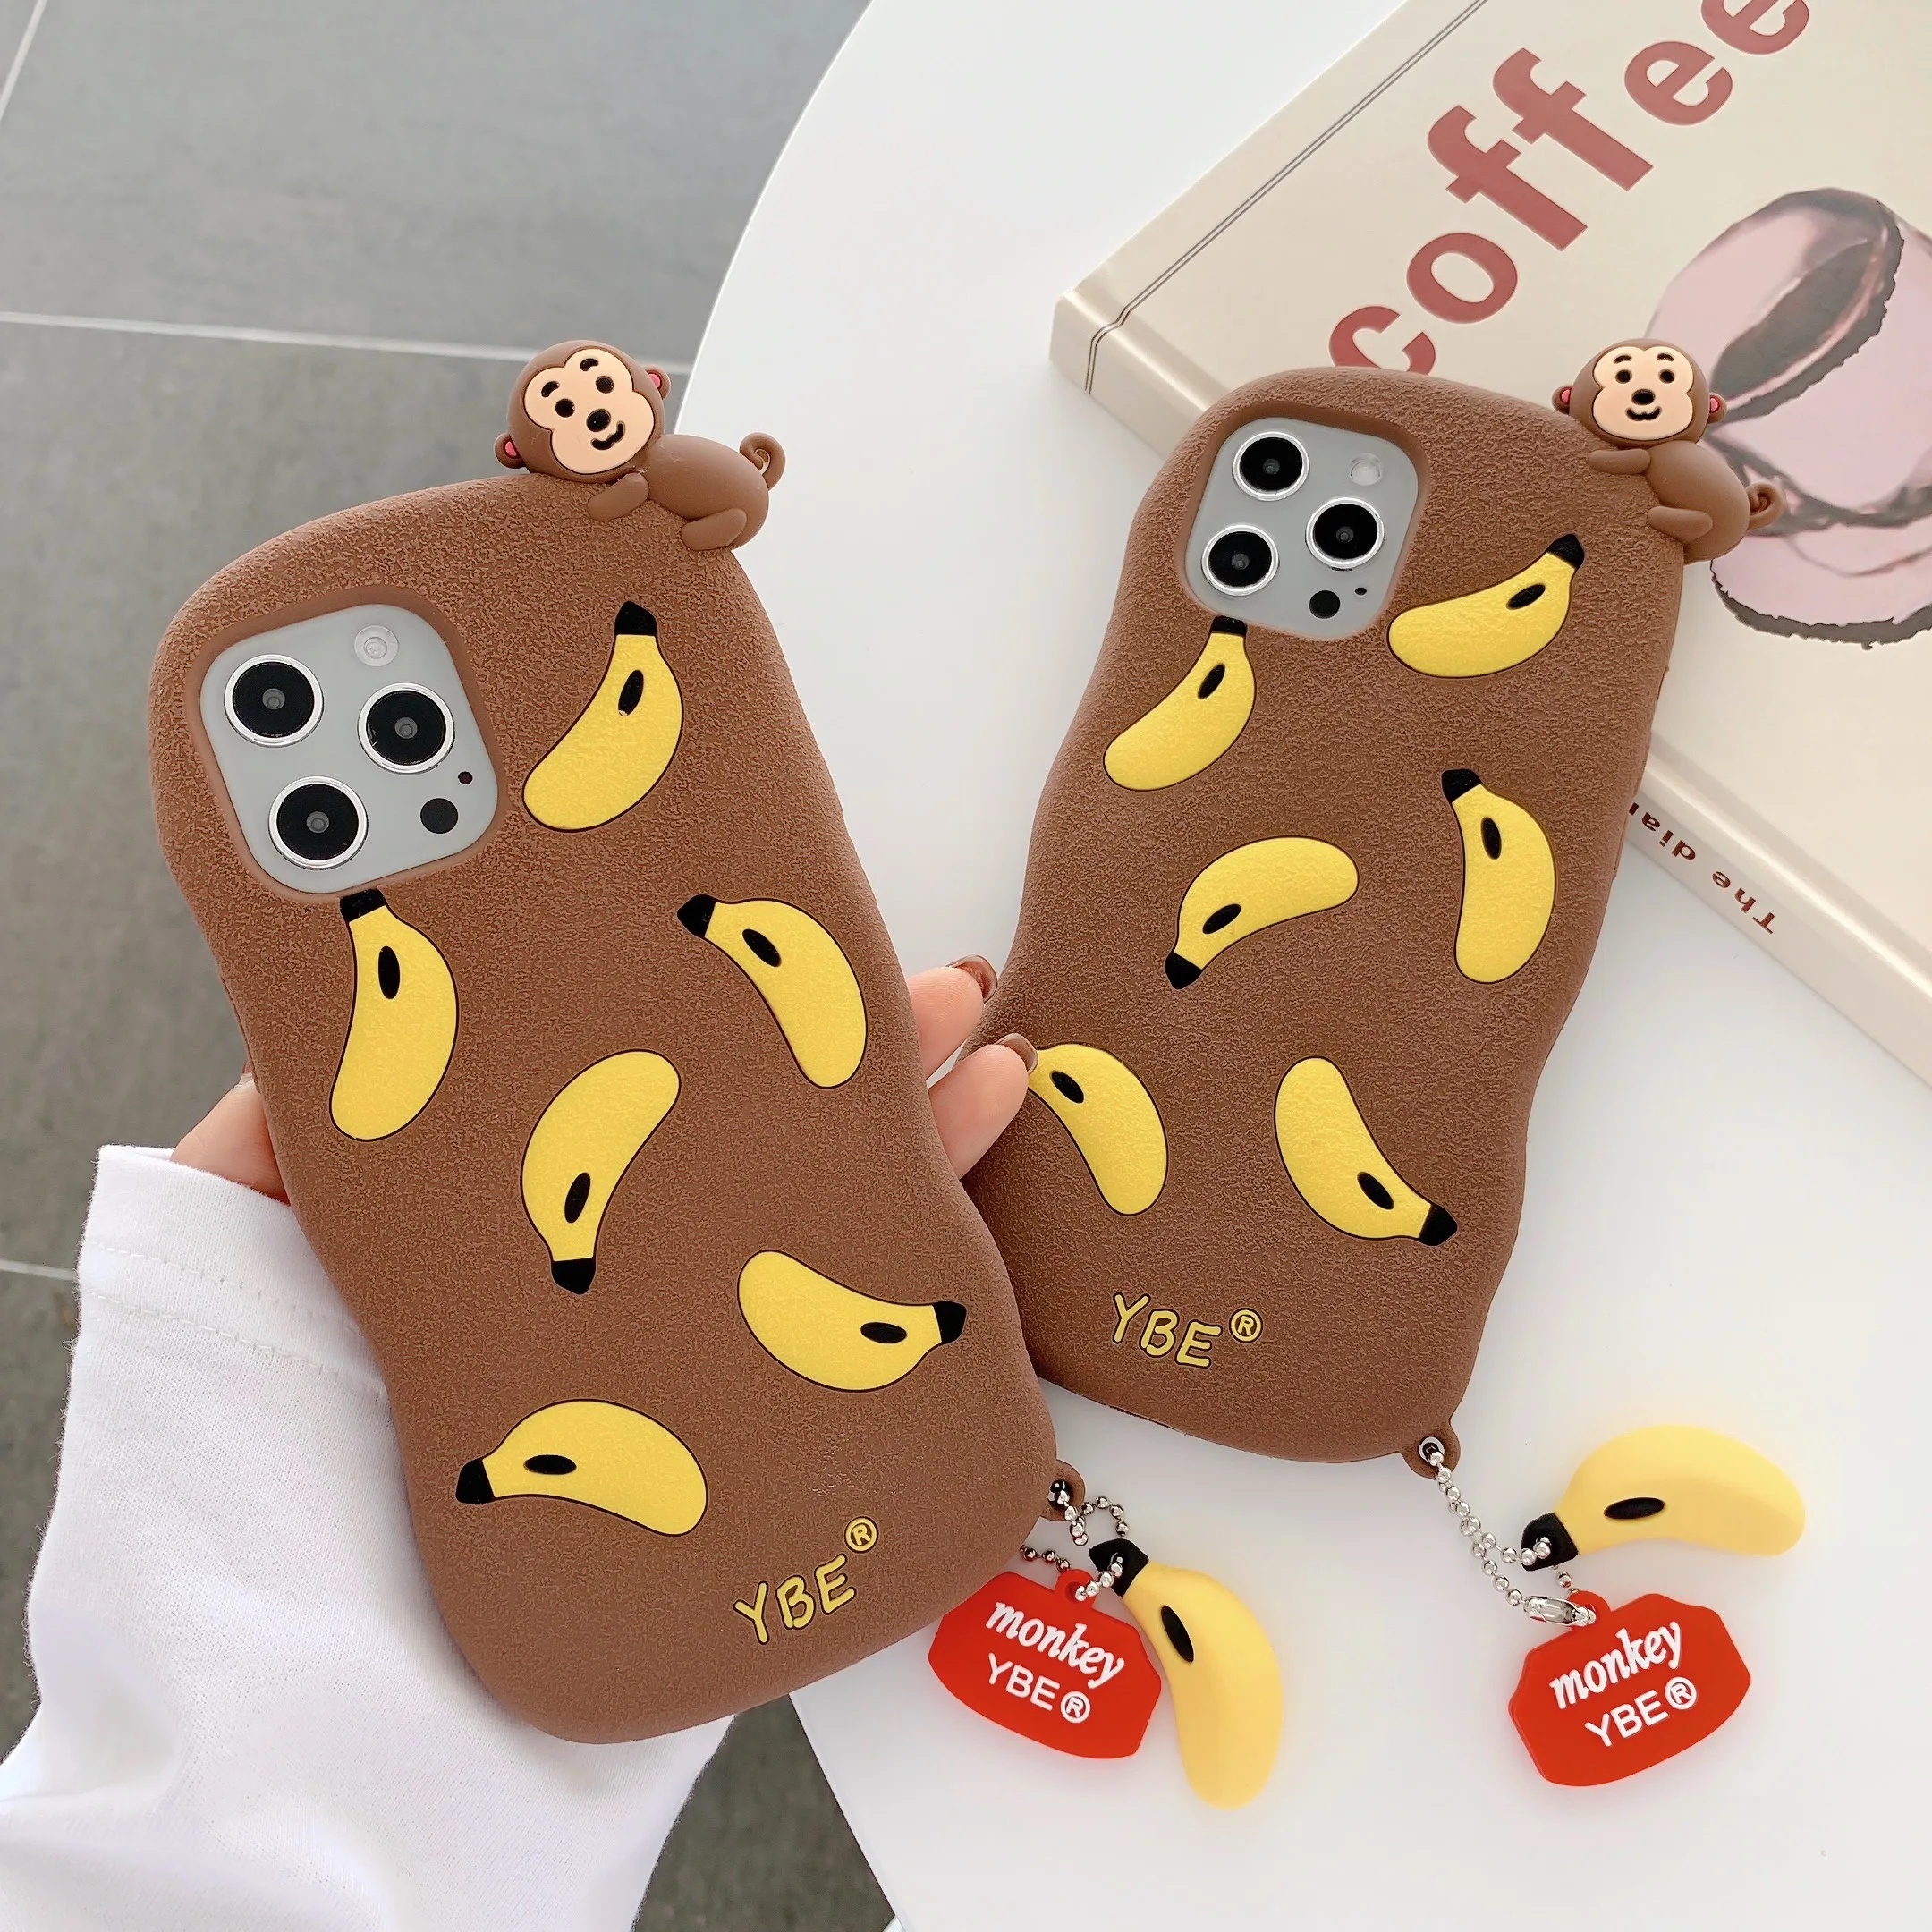 

Wholesale Lovely 3D Cartoon Cute Monkey Banana Soft Silicone Case Fundas for Apple for iPhone 7 8 Plus 11 Pro 12 Pro Max